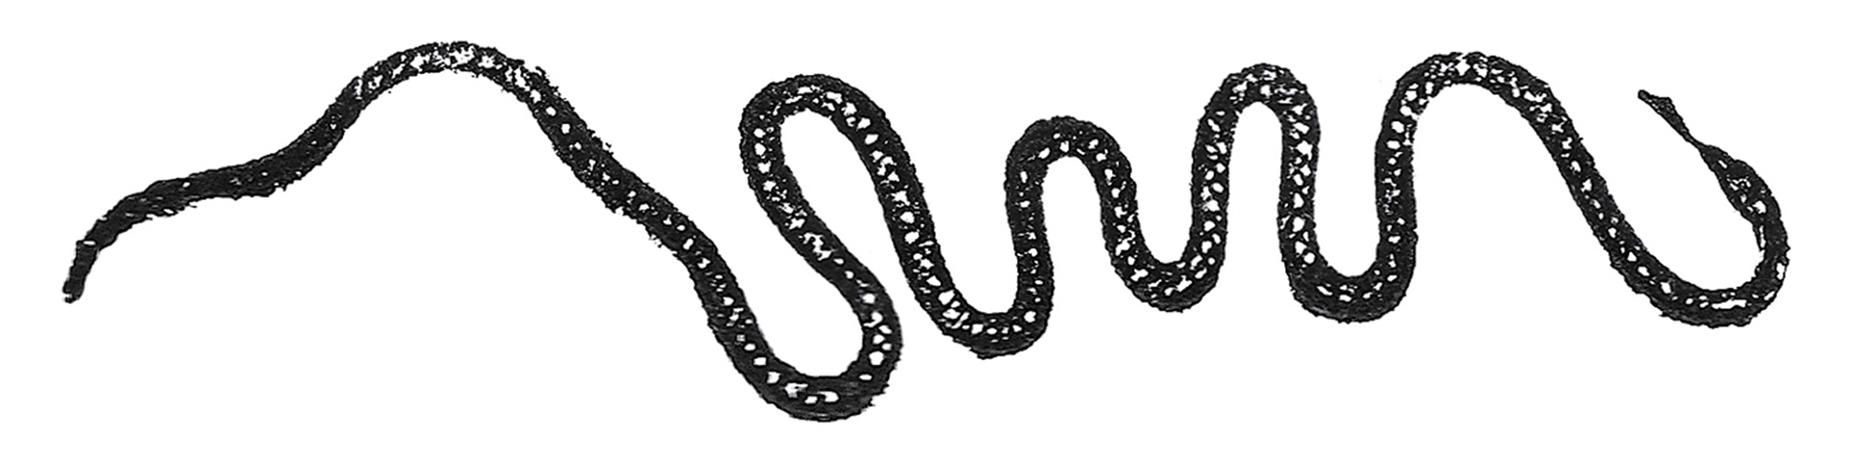 The squiggle from the Houssiaux edition of 1855, where it has been rotated one hundred and eighty degrees and turned into a serpent.